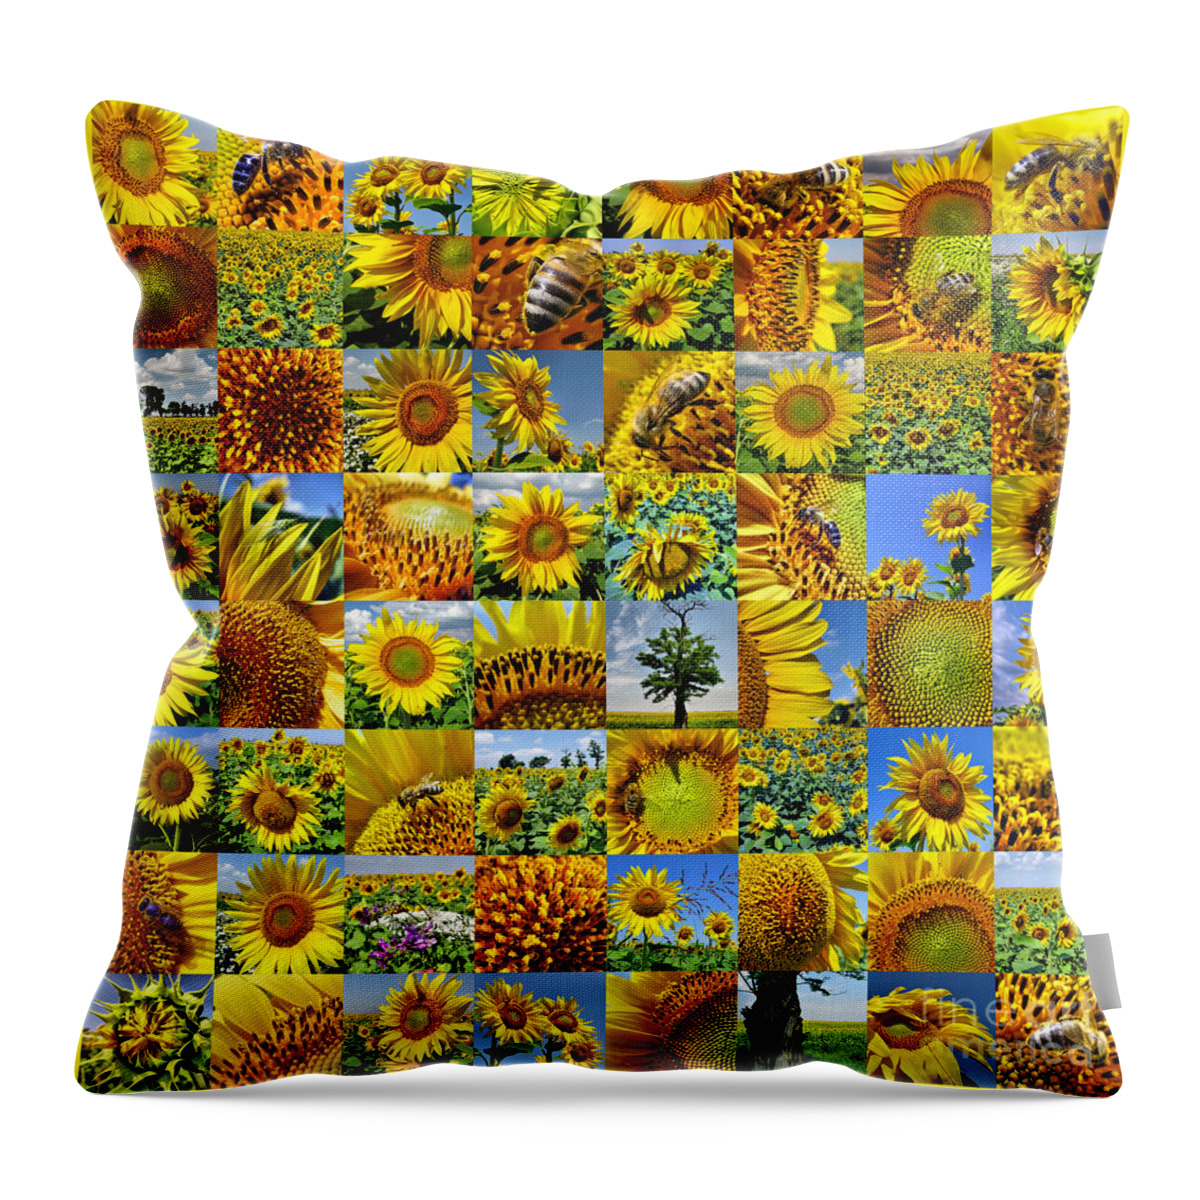 Sunflower Throw Pillow featuring the photograph Sunflower field collage in yellow by Daliana Pacuraru